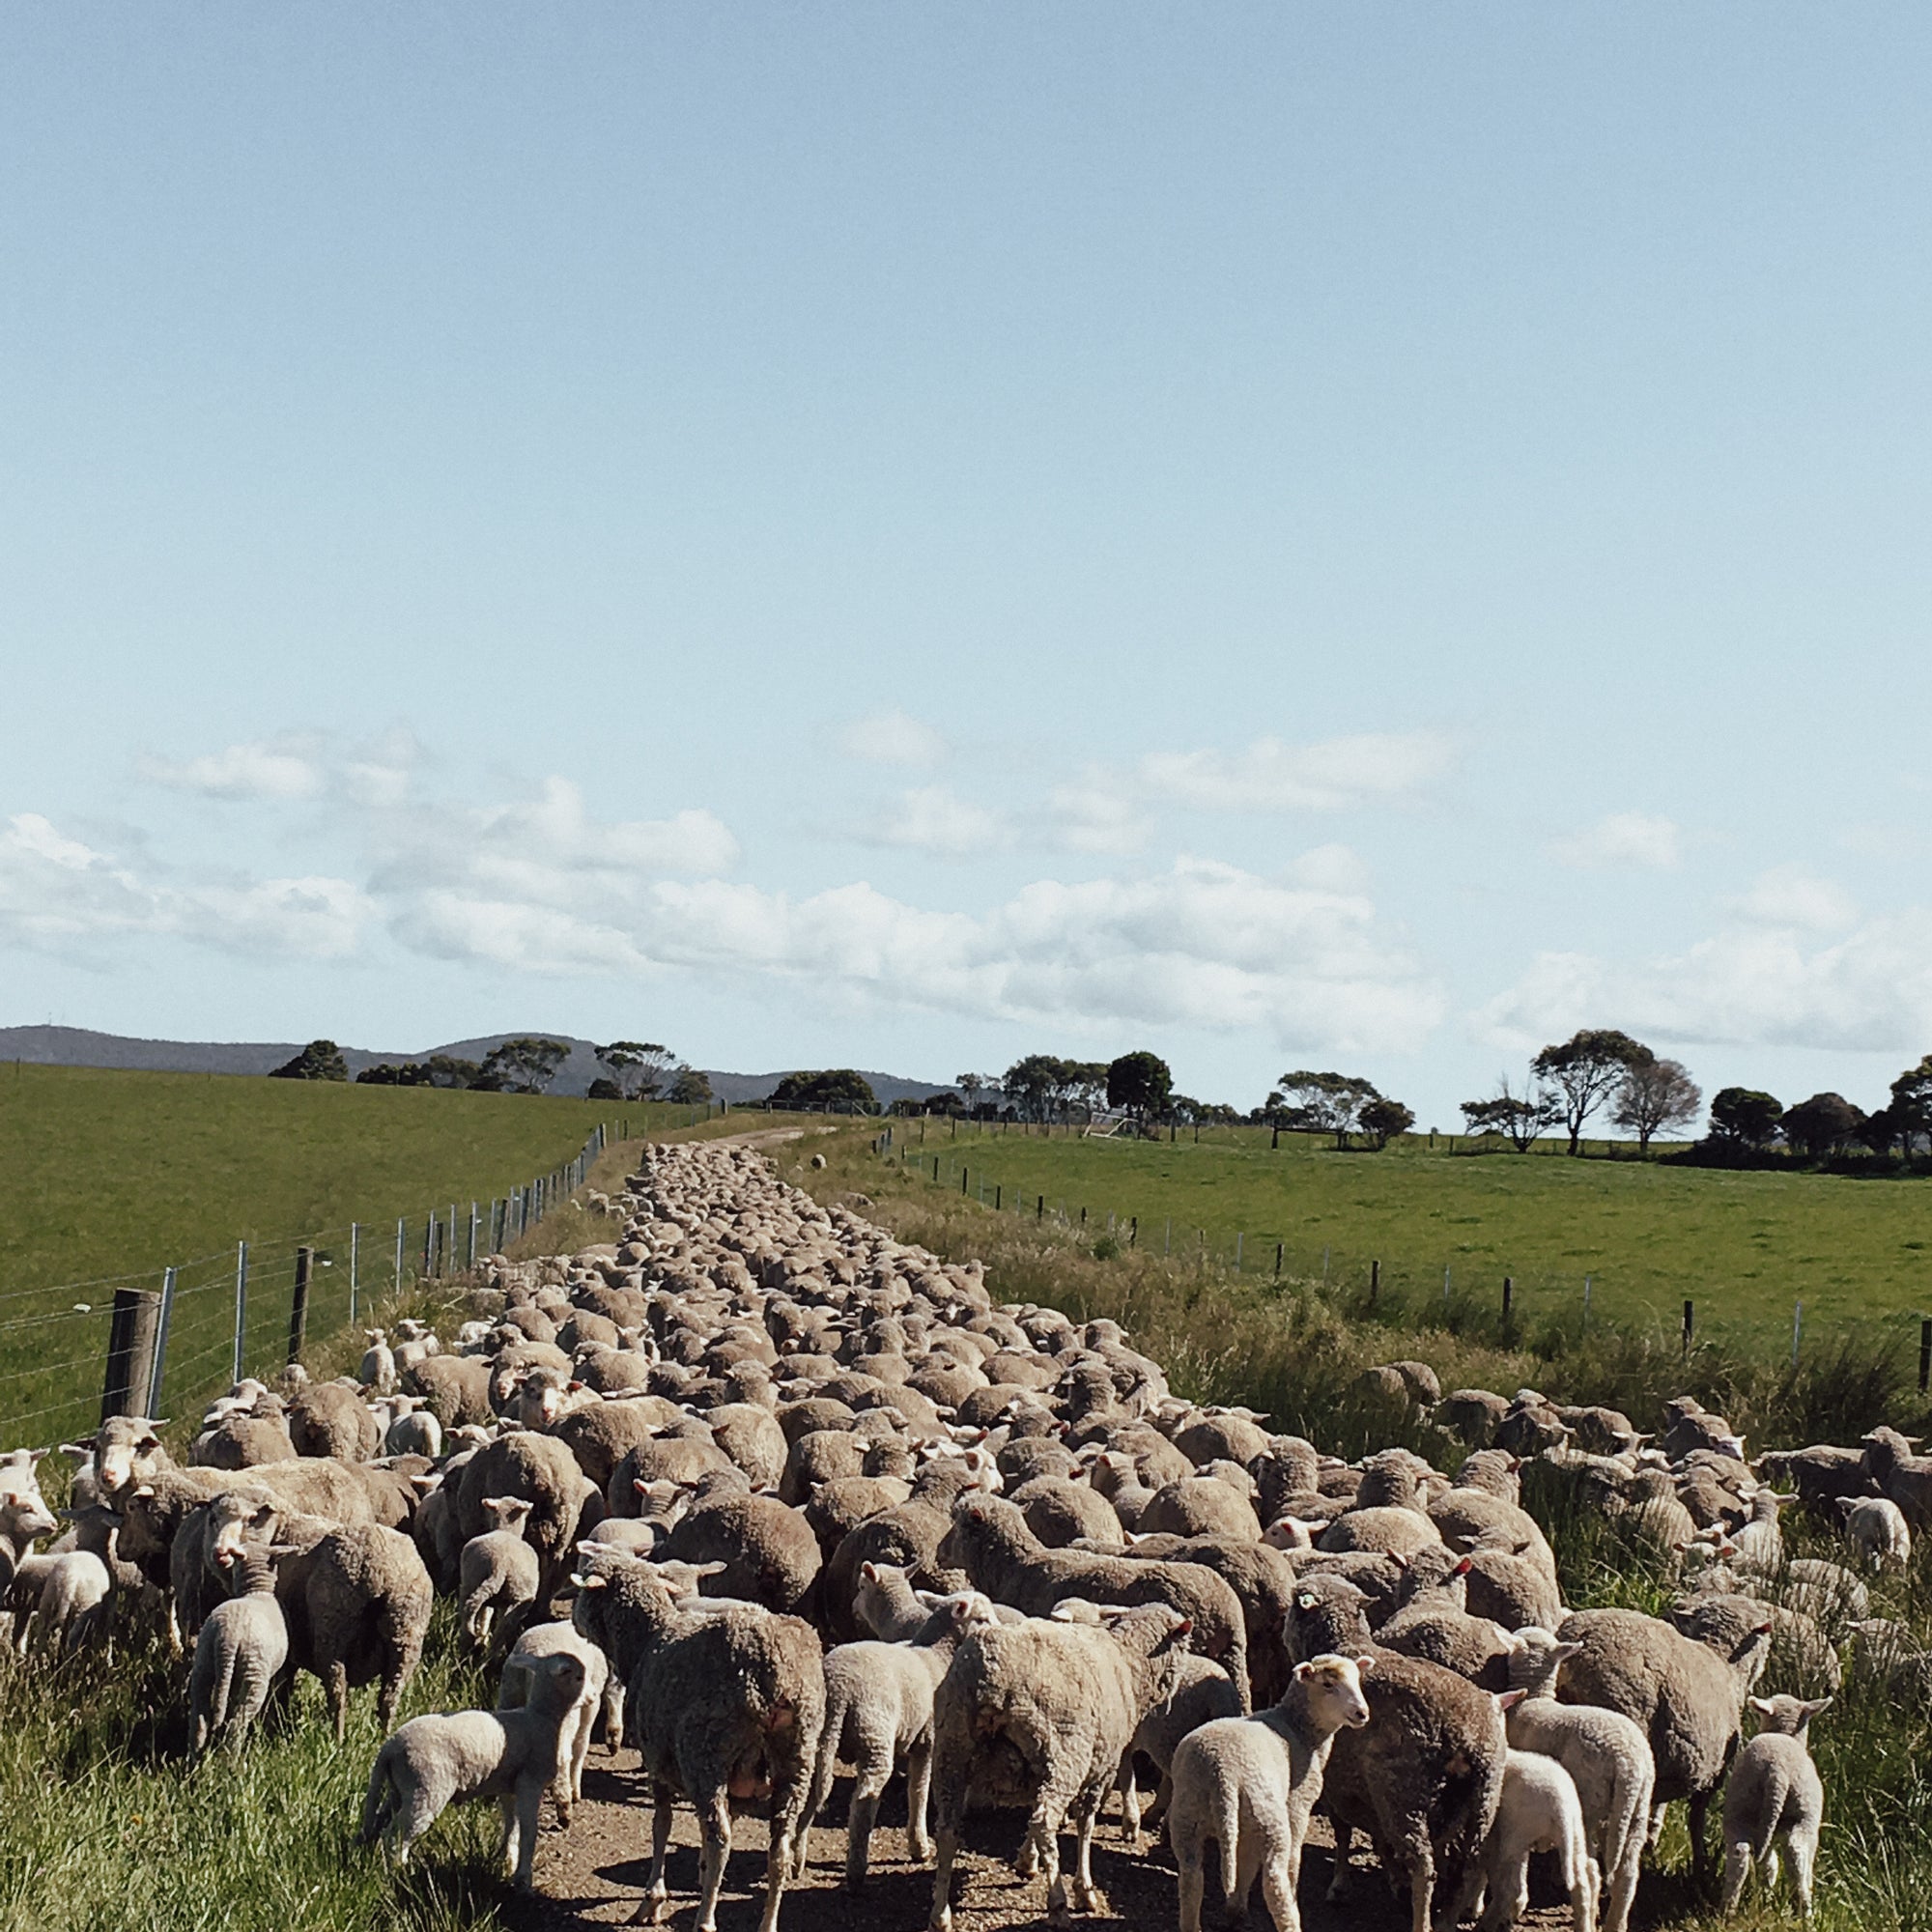 A flock of cormo sheep on the Cooper's property on a clear day.